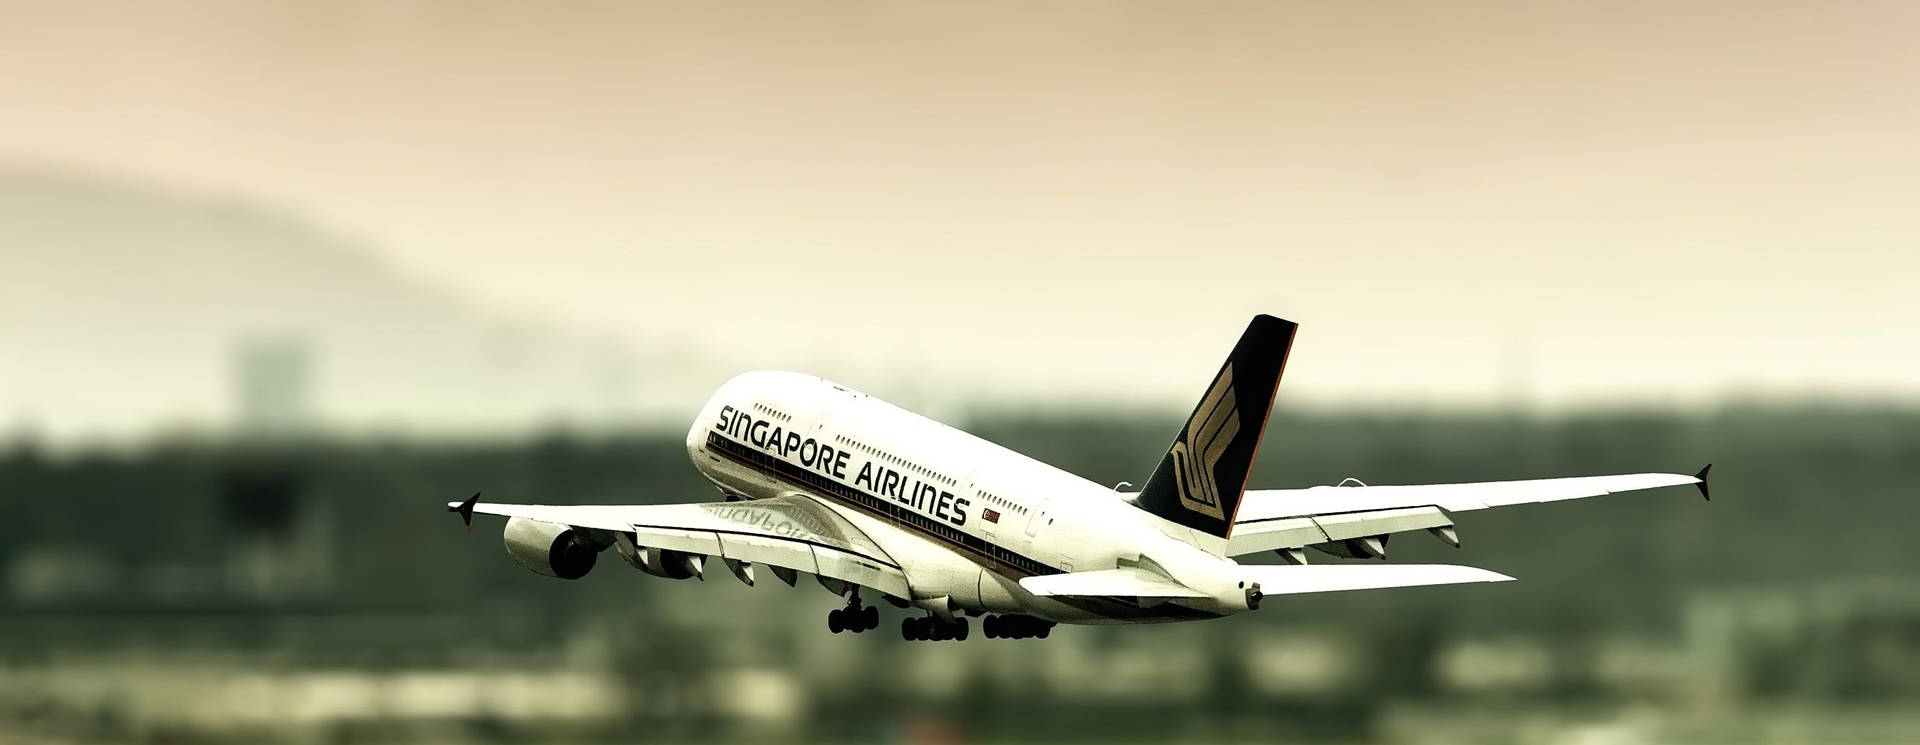 Singapore Airlines 2558 X 992 Wallpaper